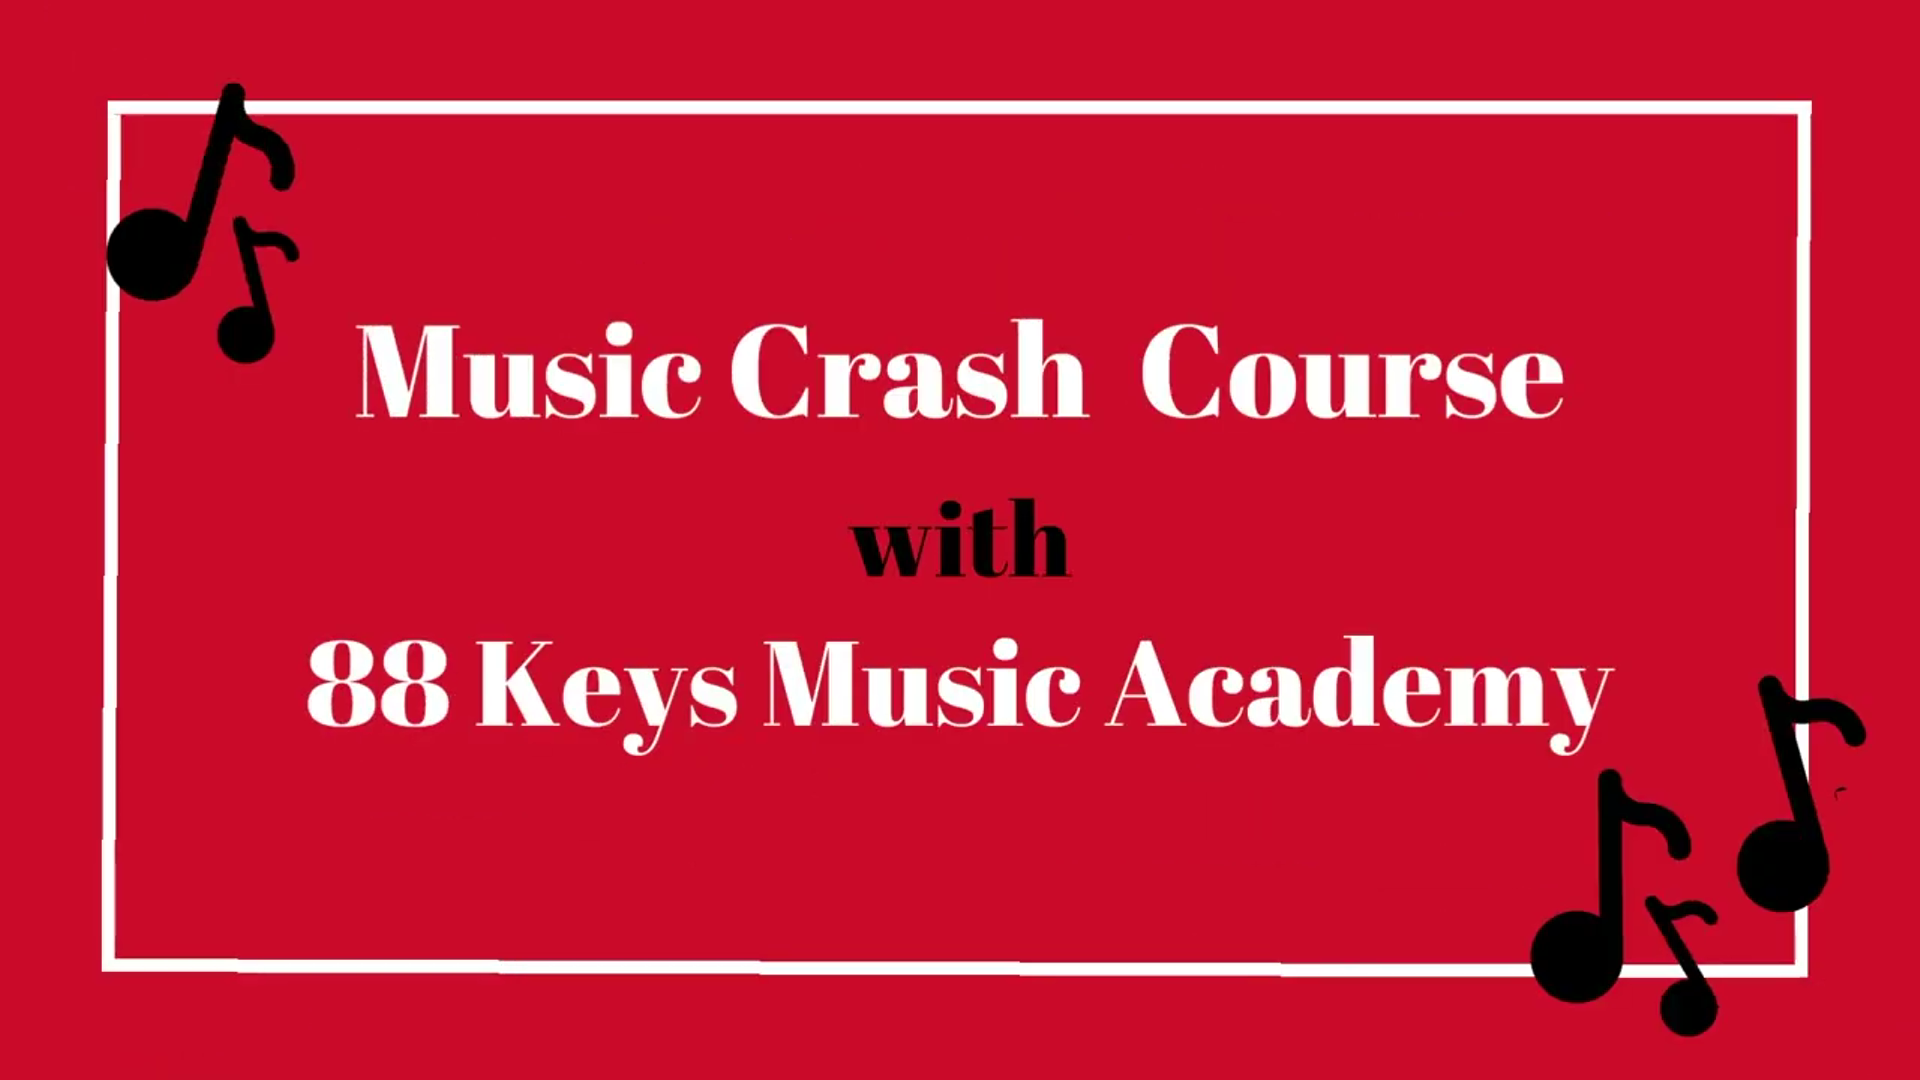 Graphic with the words "Music Crash Course with 88 Keys Music Academy" on a red background